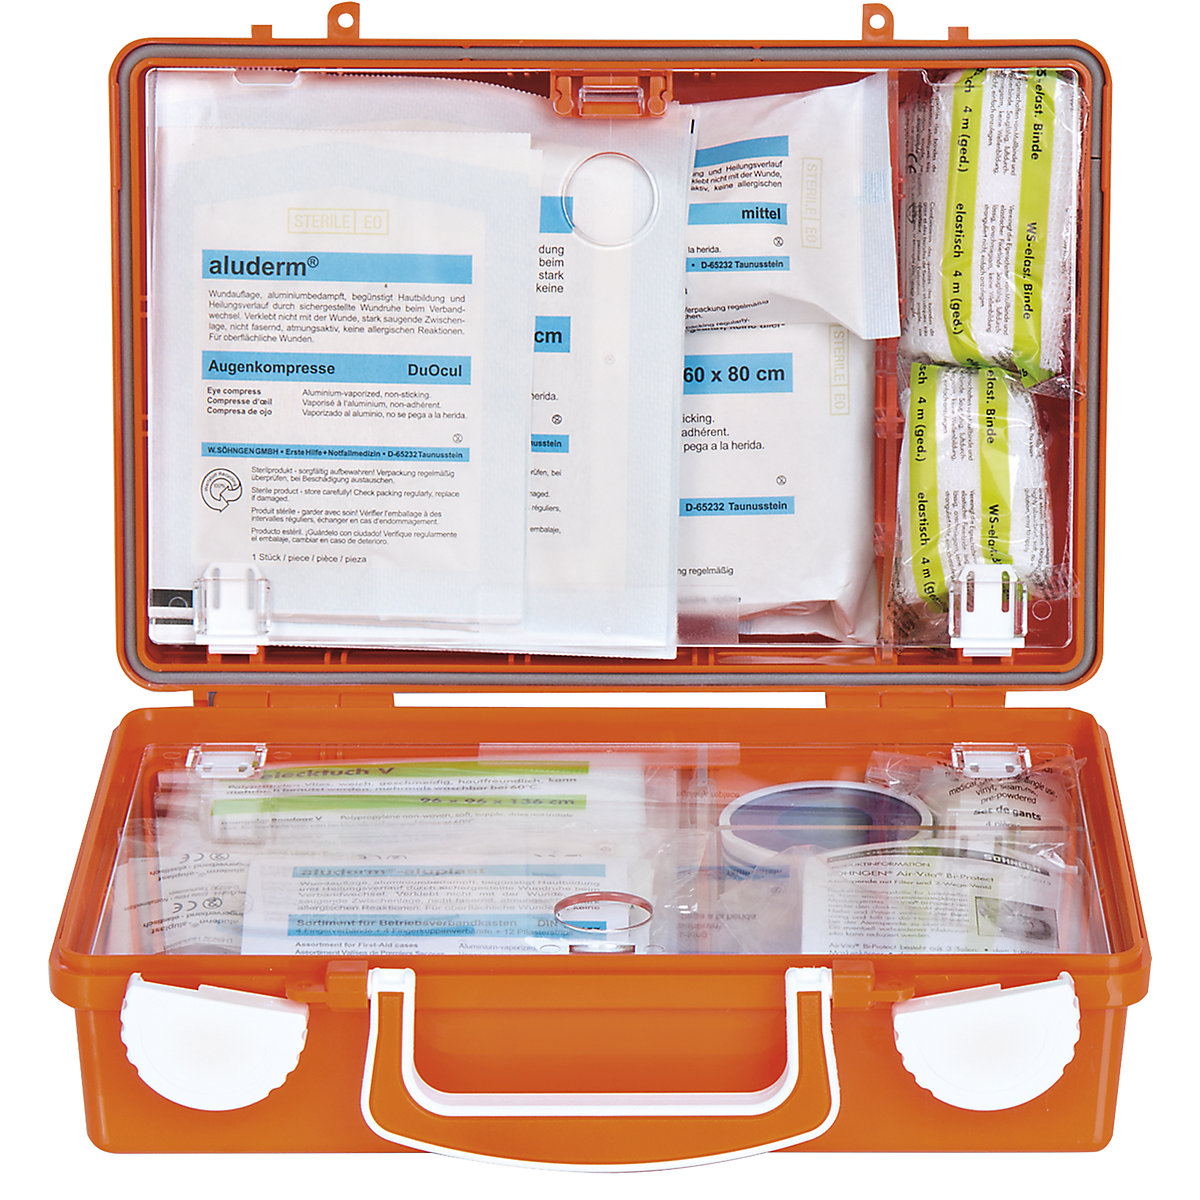 SÖHNGEN – First aid case, DIN 13157 compliant, HxWxD 170 x 260 x 110 mm, with contents